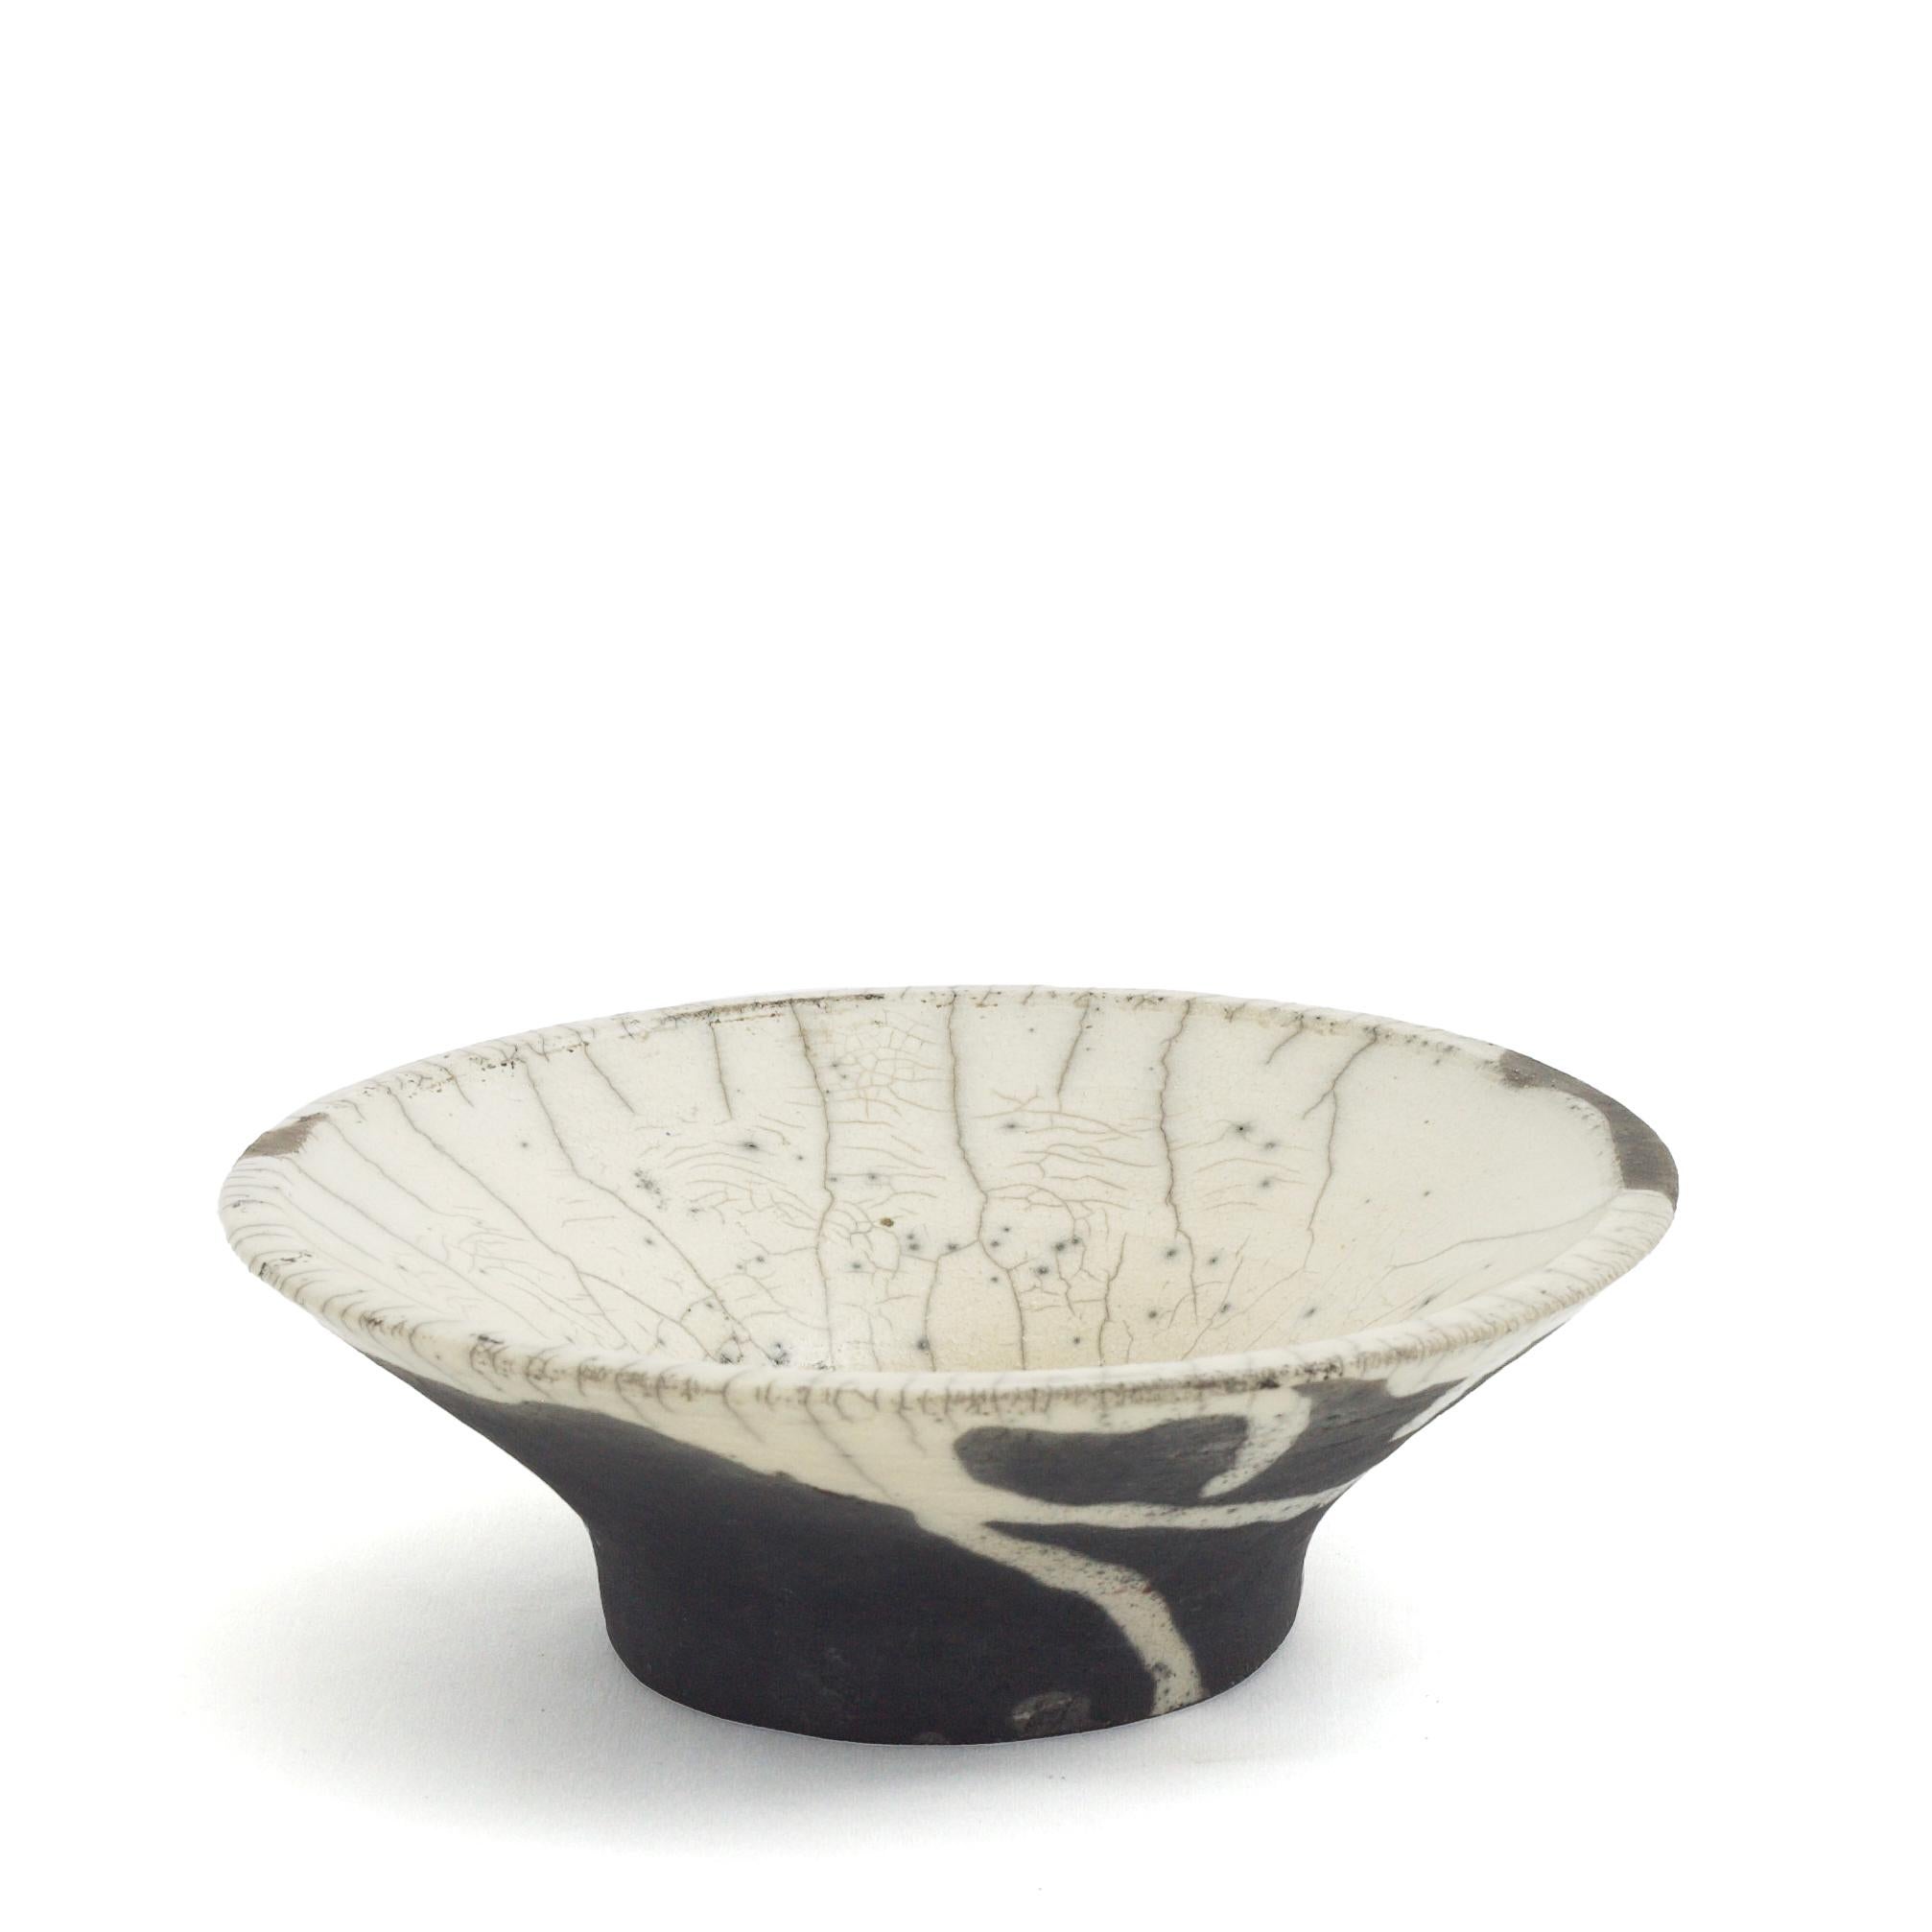 Cratere Vase

Named after the Italian for crater, the design of this handcrafted ceramic bowl flaunts a singular design of speckles and crackles. The white look on the interior - accented with crystalline - seemingly overflows on the external